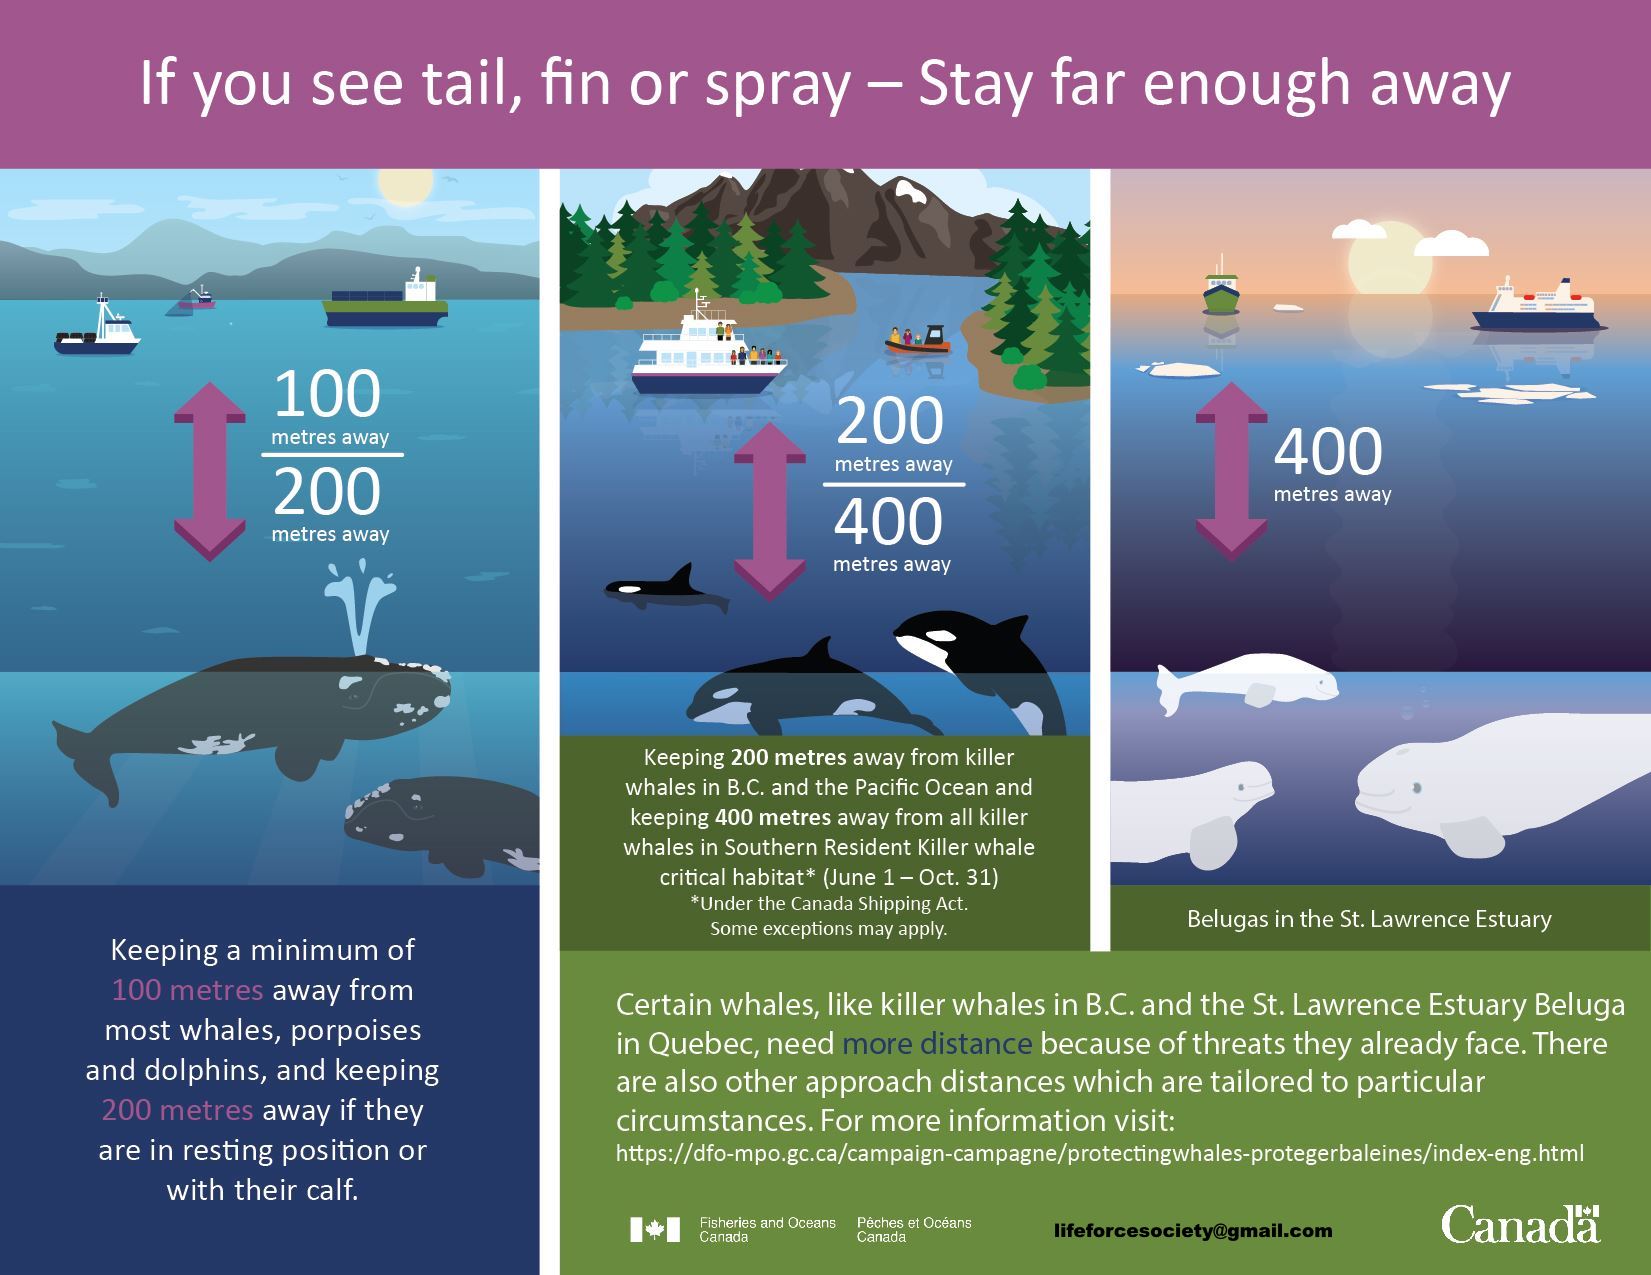 Canadian Whale Protection Regulations 2019